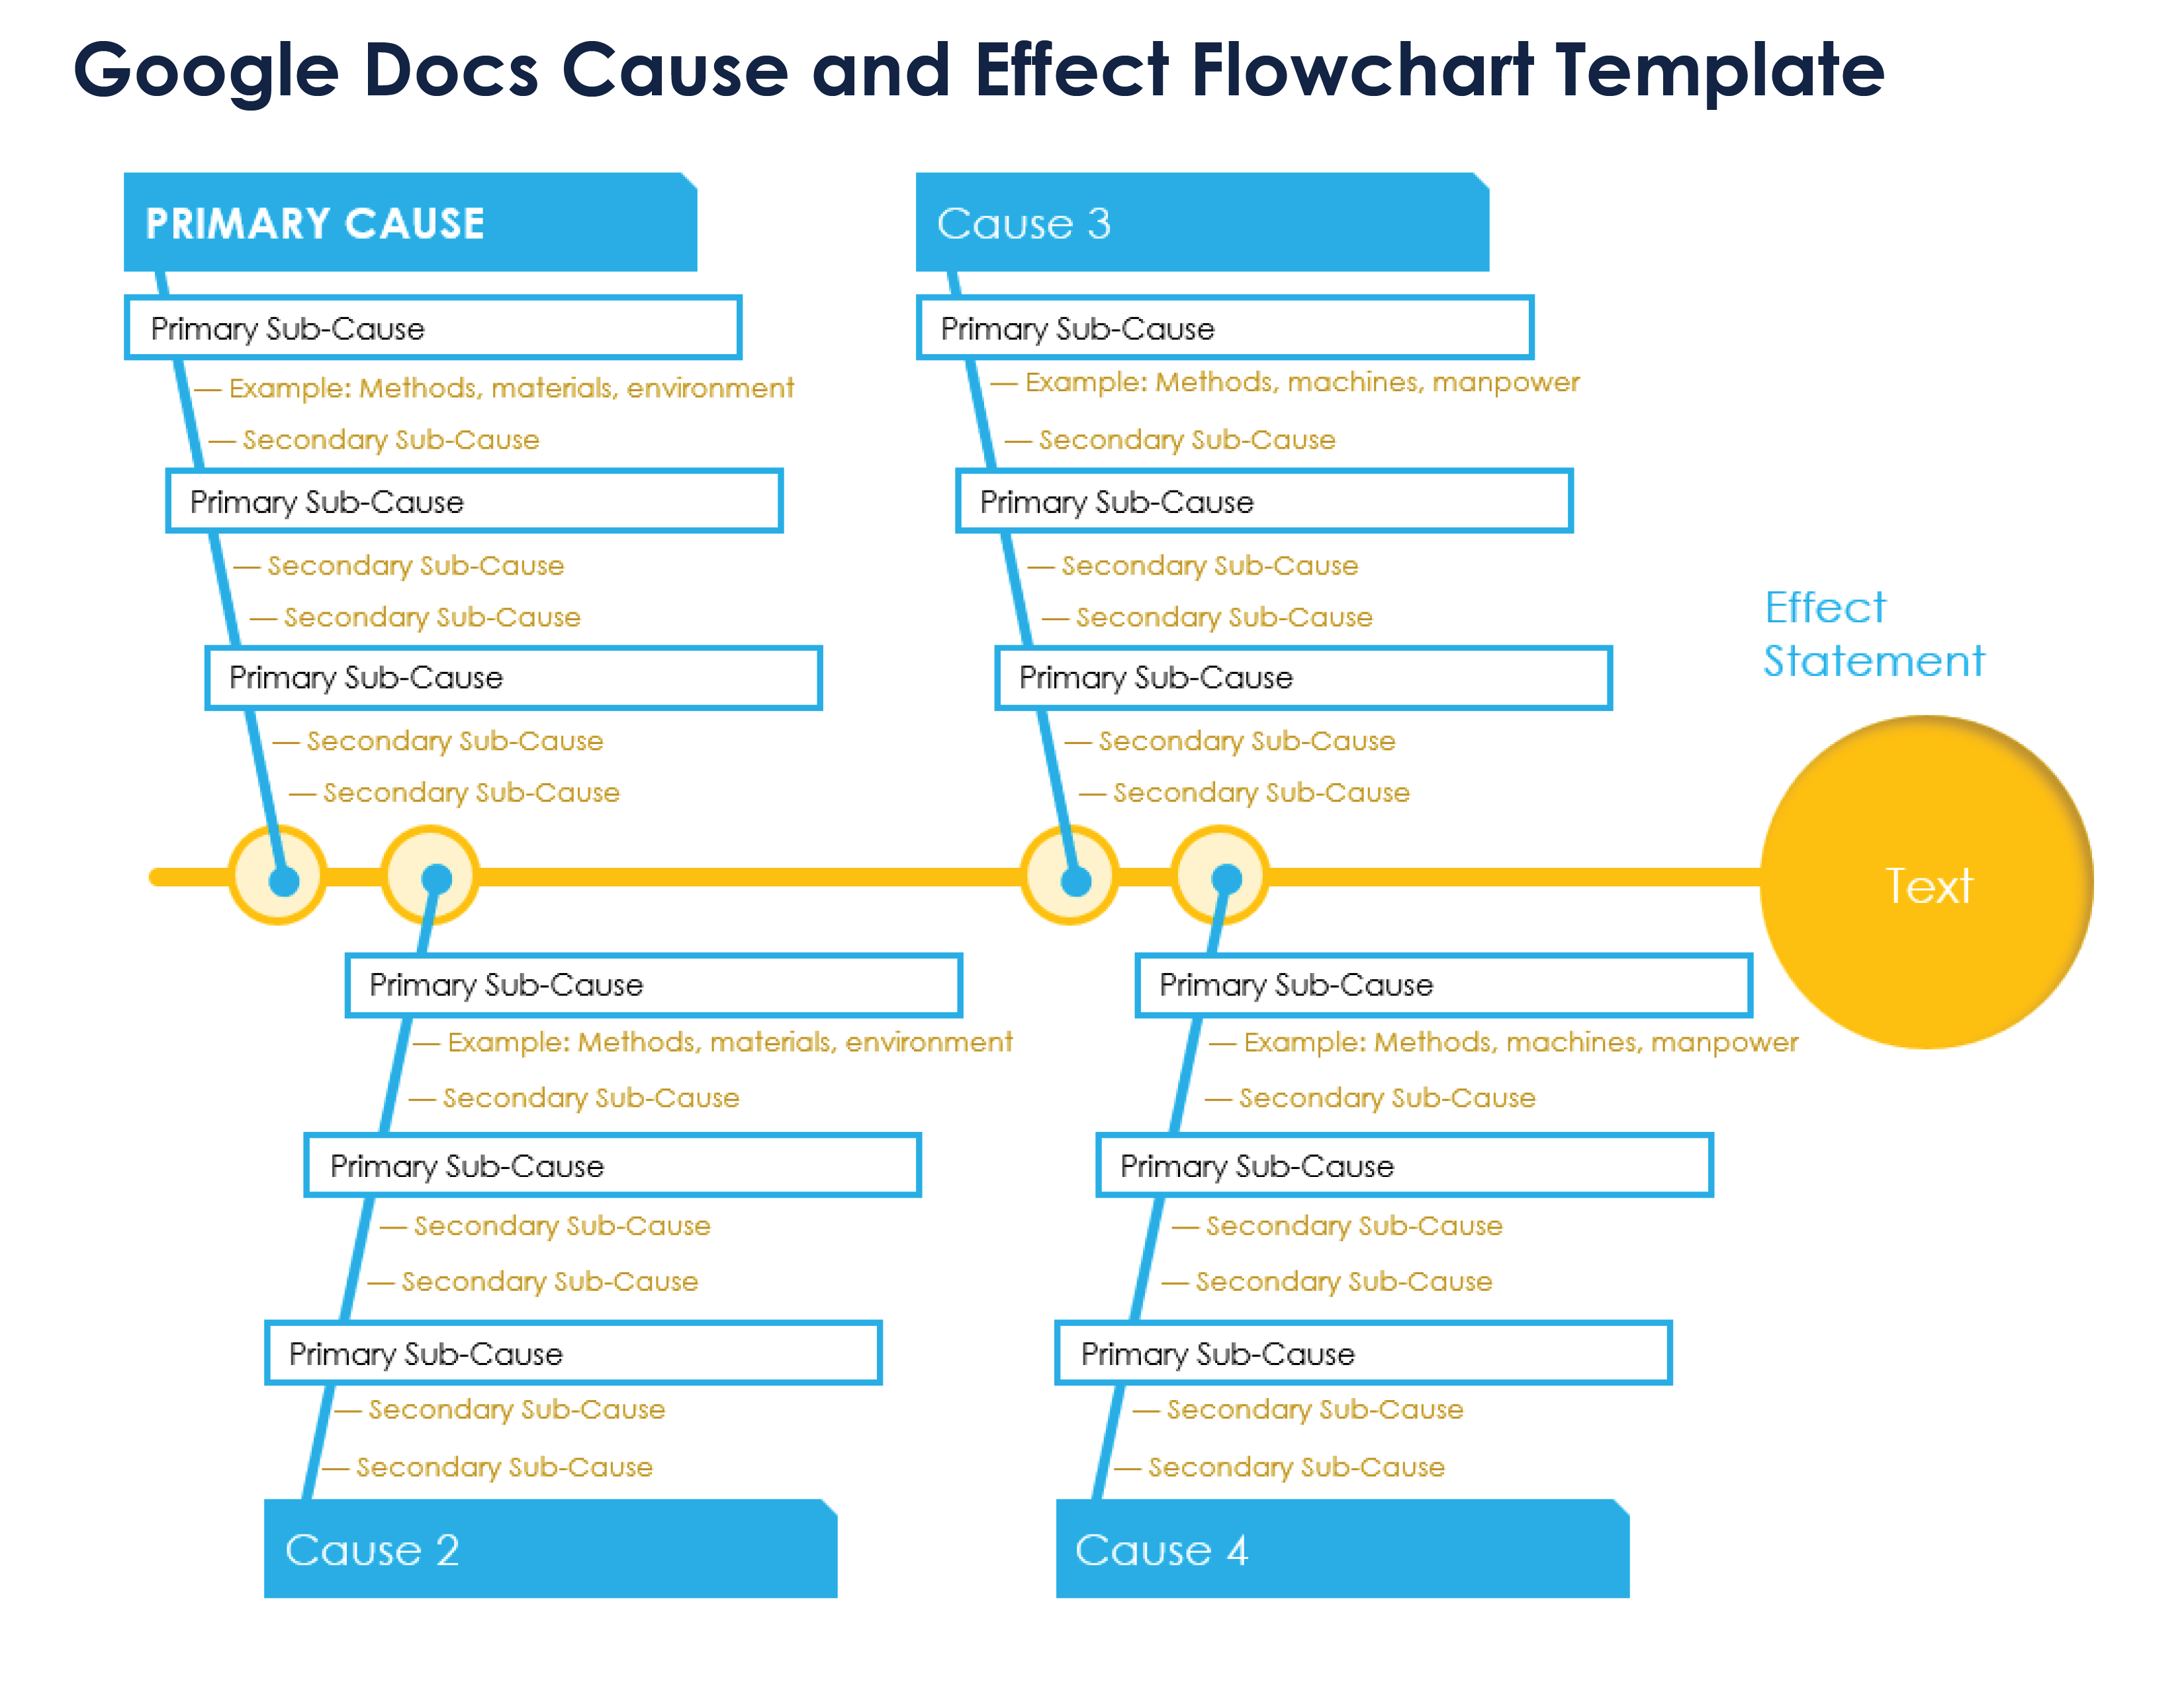 Google Docs Cause and Effect Flowchart Template